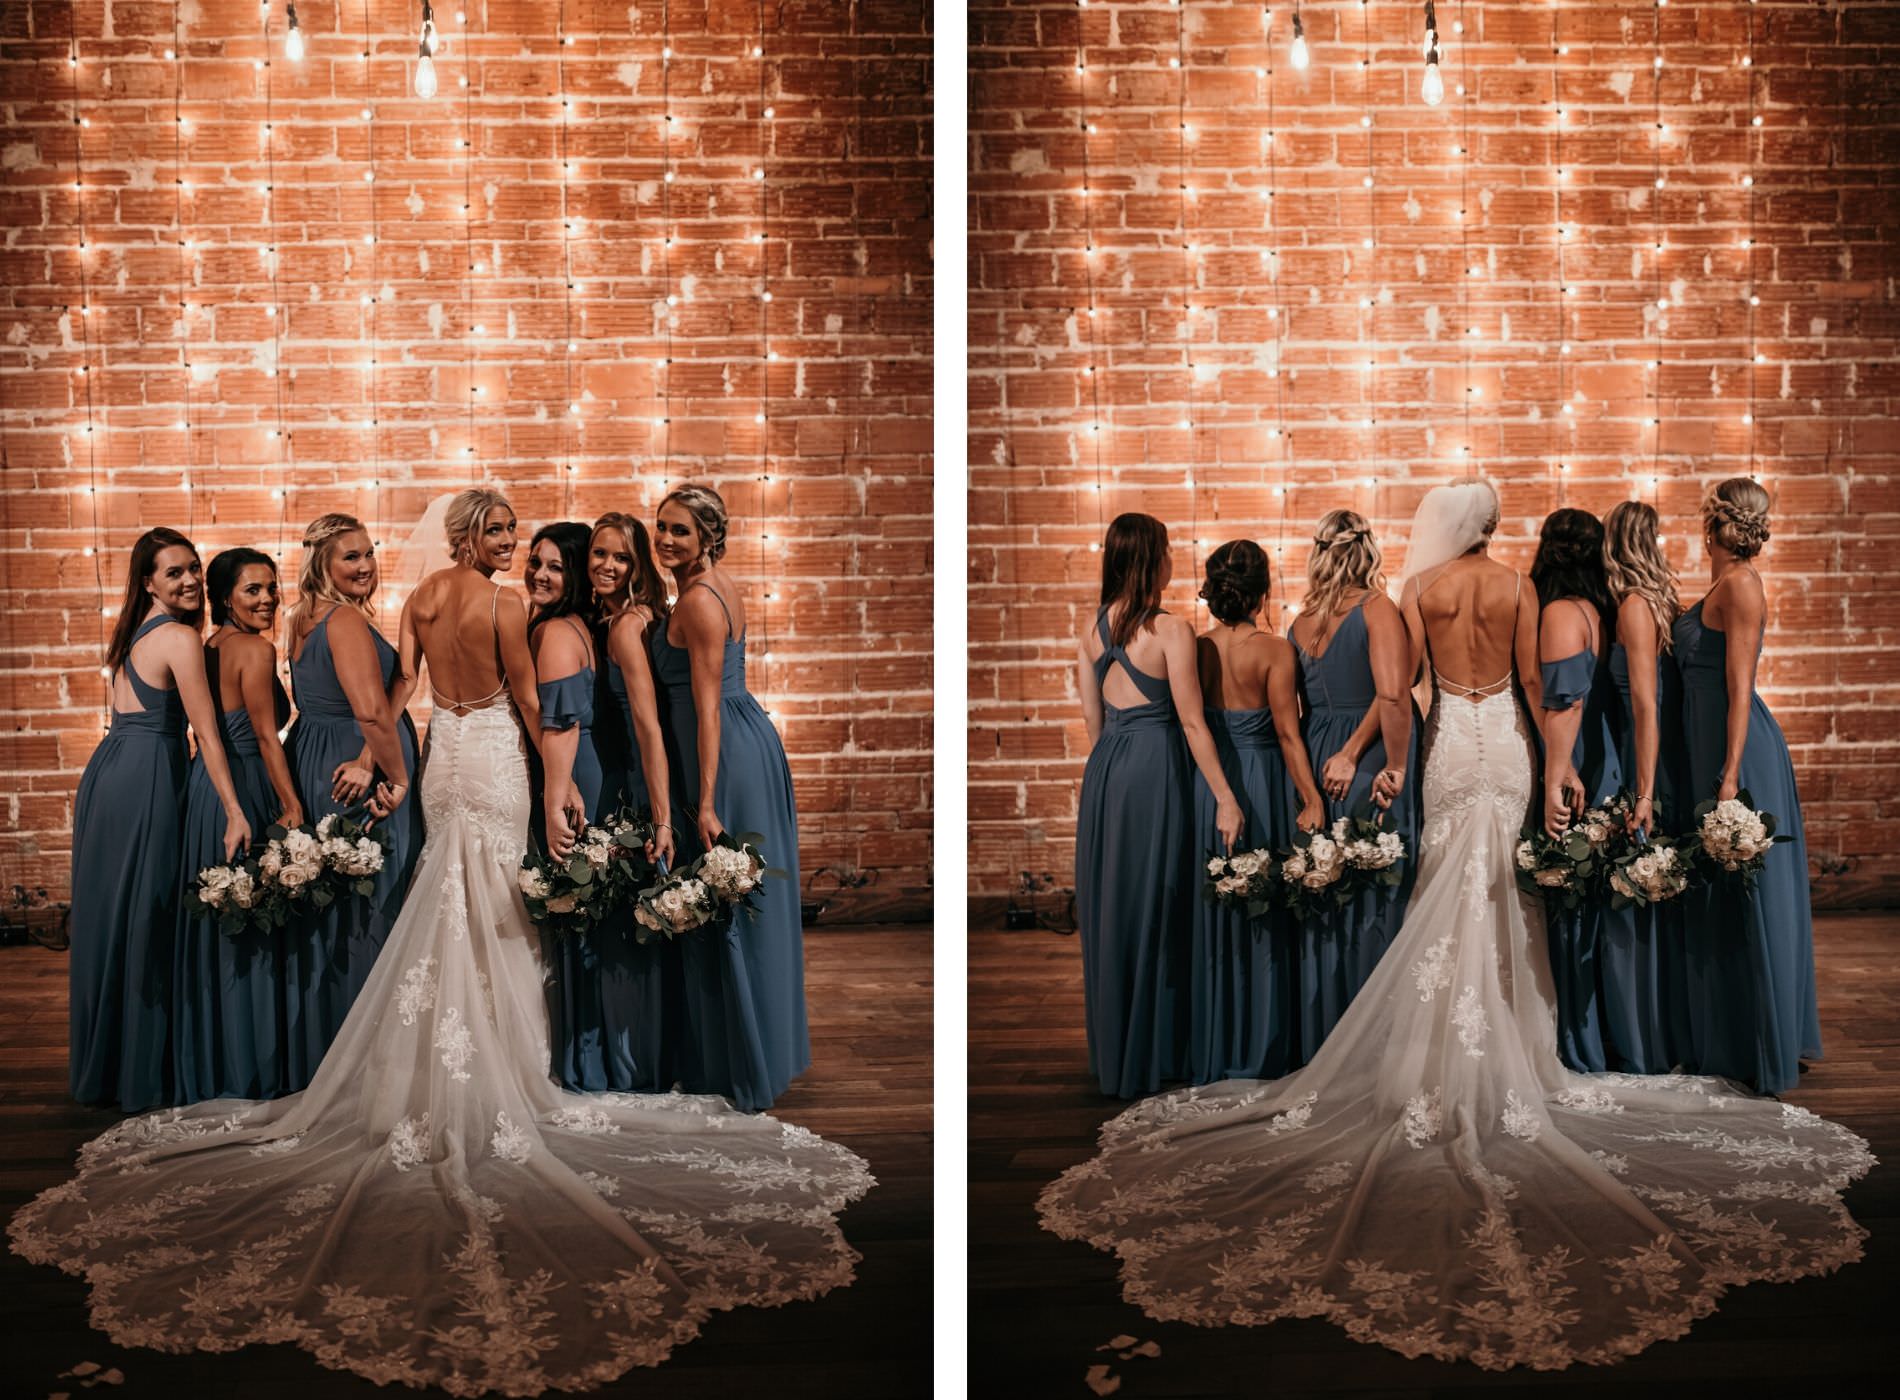 Tampa Bay Bride and Bridesmaids Wedding Portrait, Bridesmaids in Mix and Match Long Dusty Blue Dresses Holding White and Greenery Floral Bouquets, in Front of Exposed Red Brick Wall and Romantic String Lighting | Unique Florida Wedding Venue NOVA 535 in Downtown St. Pete